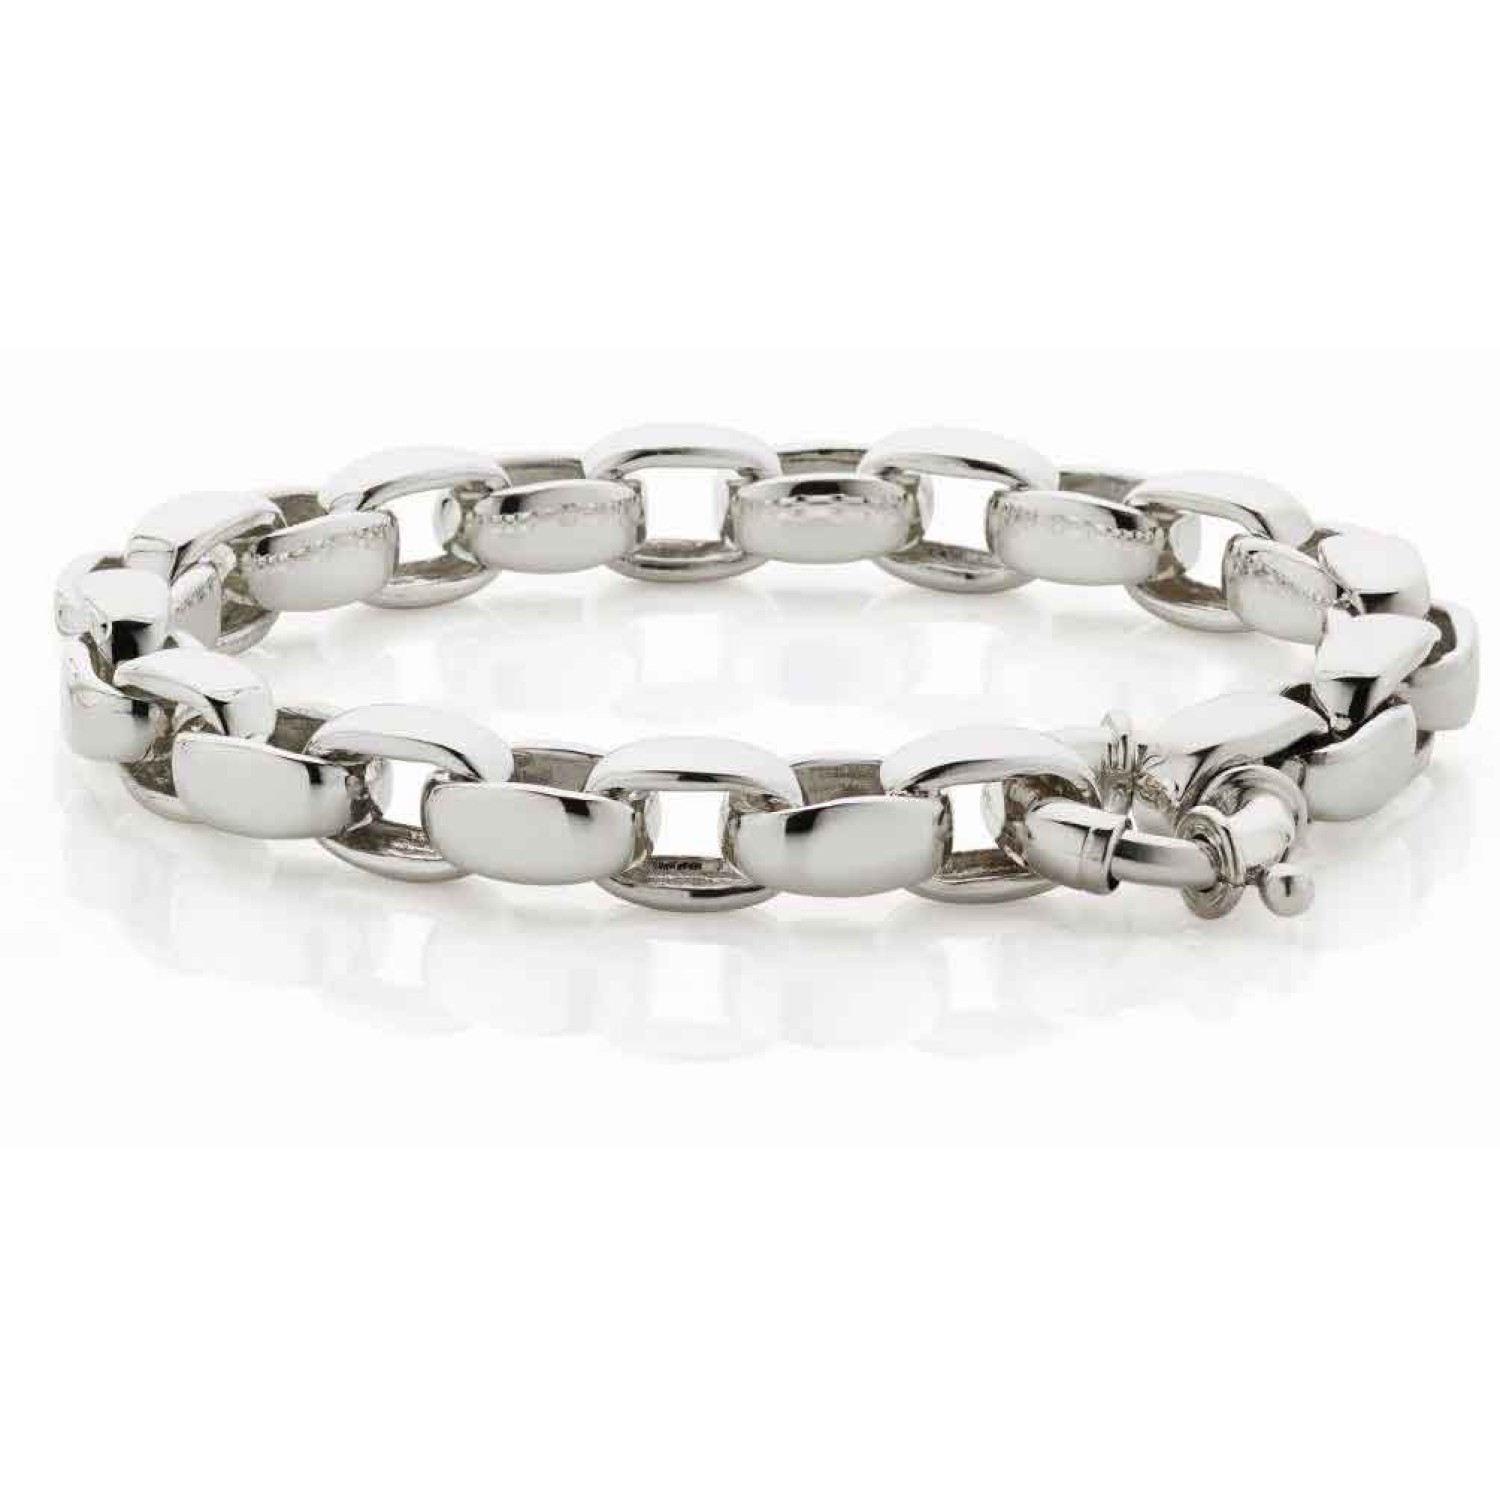 Sterling Silver Belcher Bracelet. Crafted in sterling silver Oxipay is simply the easier way to pay - use Oxipay and well spread your payment up to a maximum of $1500 over 4 easy instalments. No interest. Ever!925 Sterling Silver Christies exclusive 5 @ch